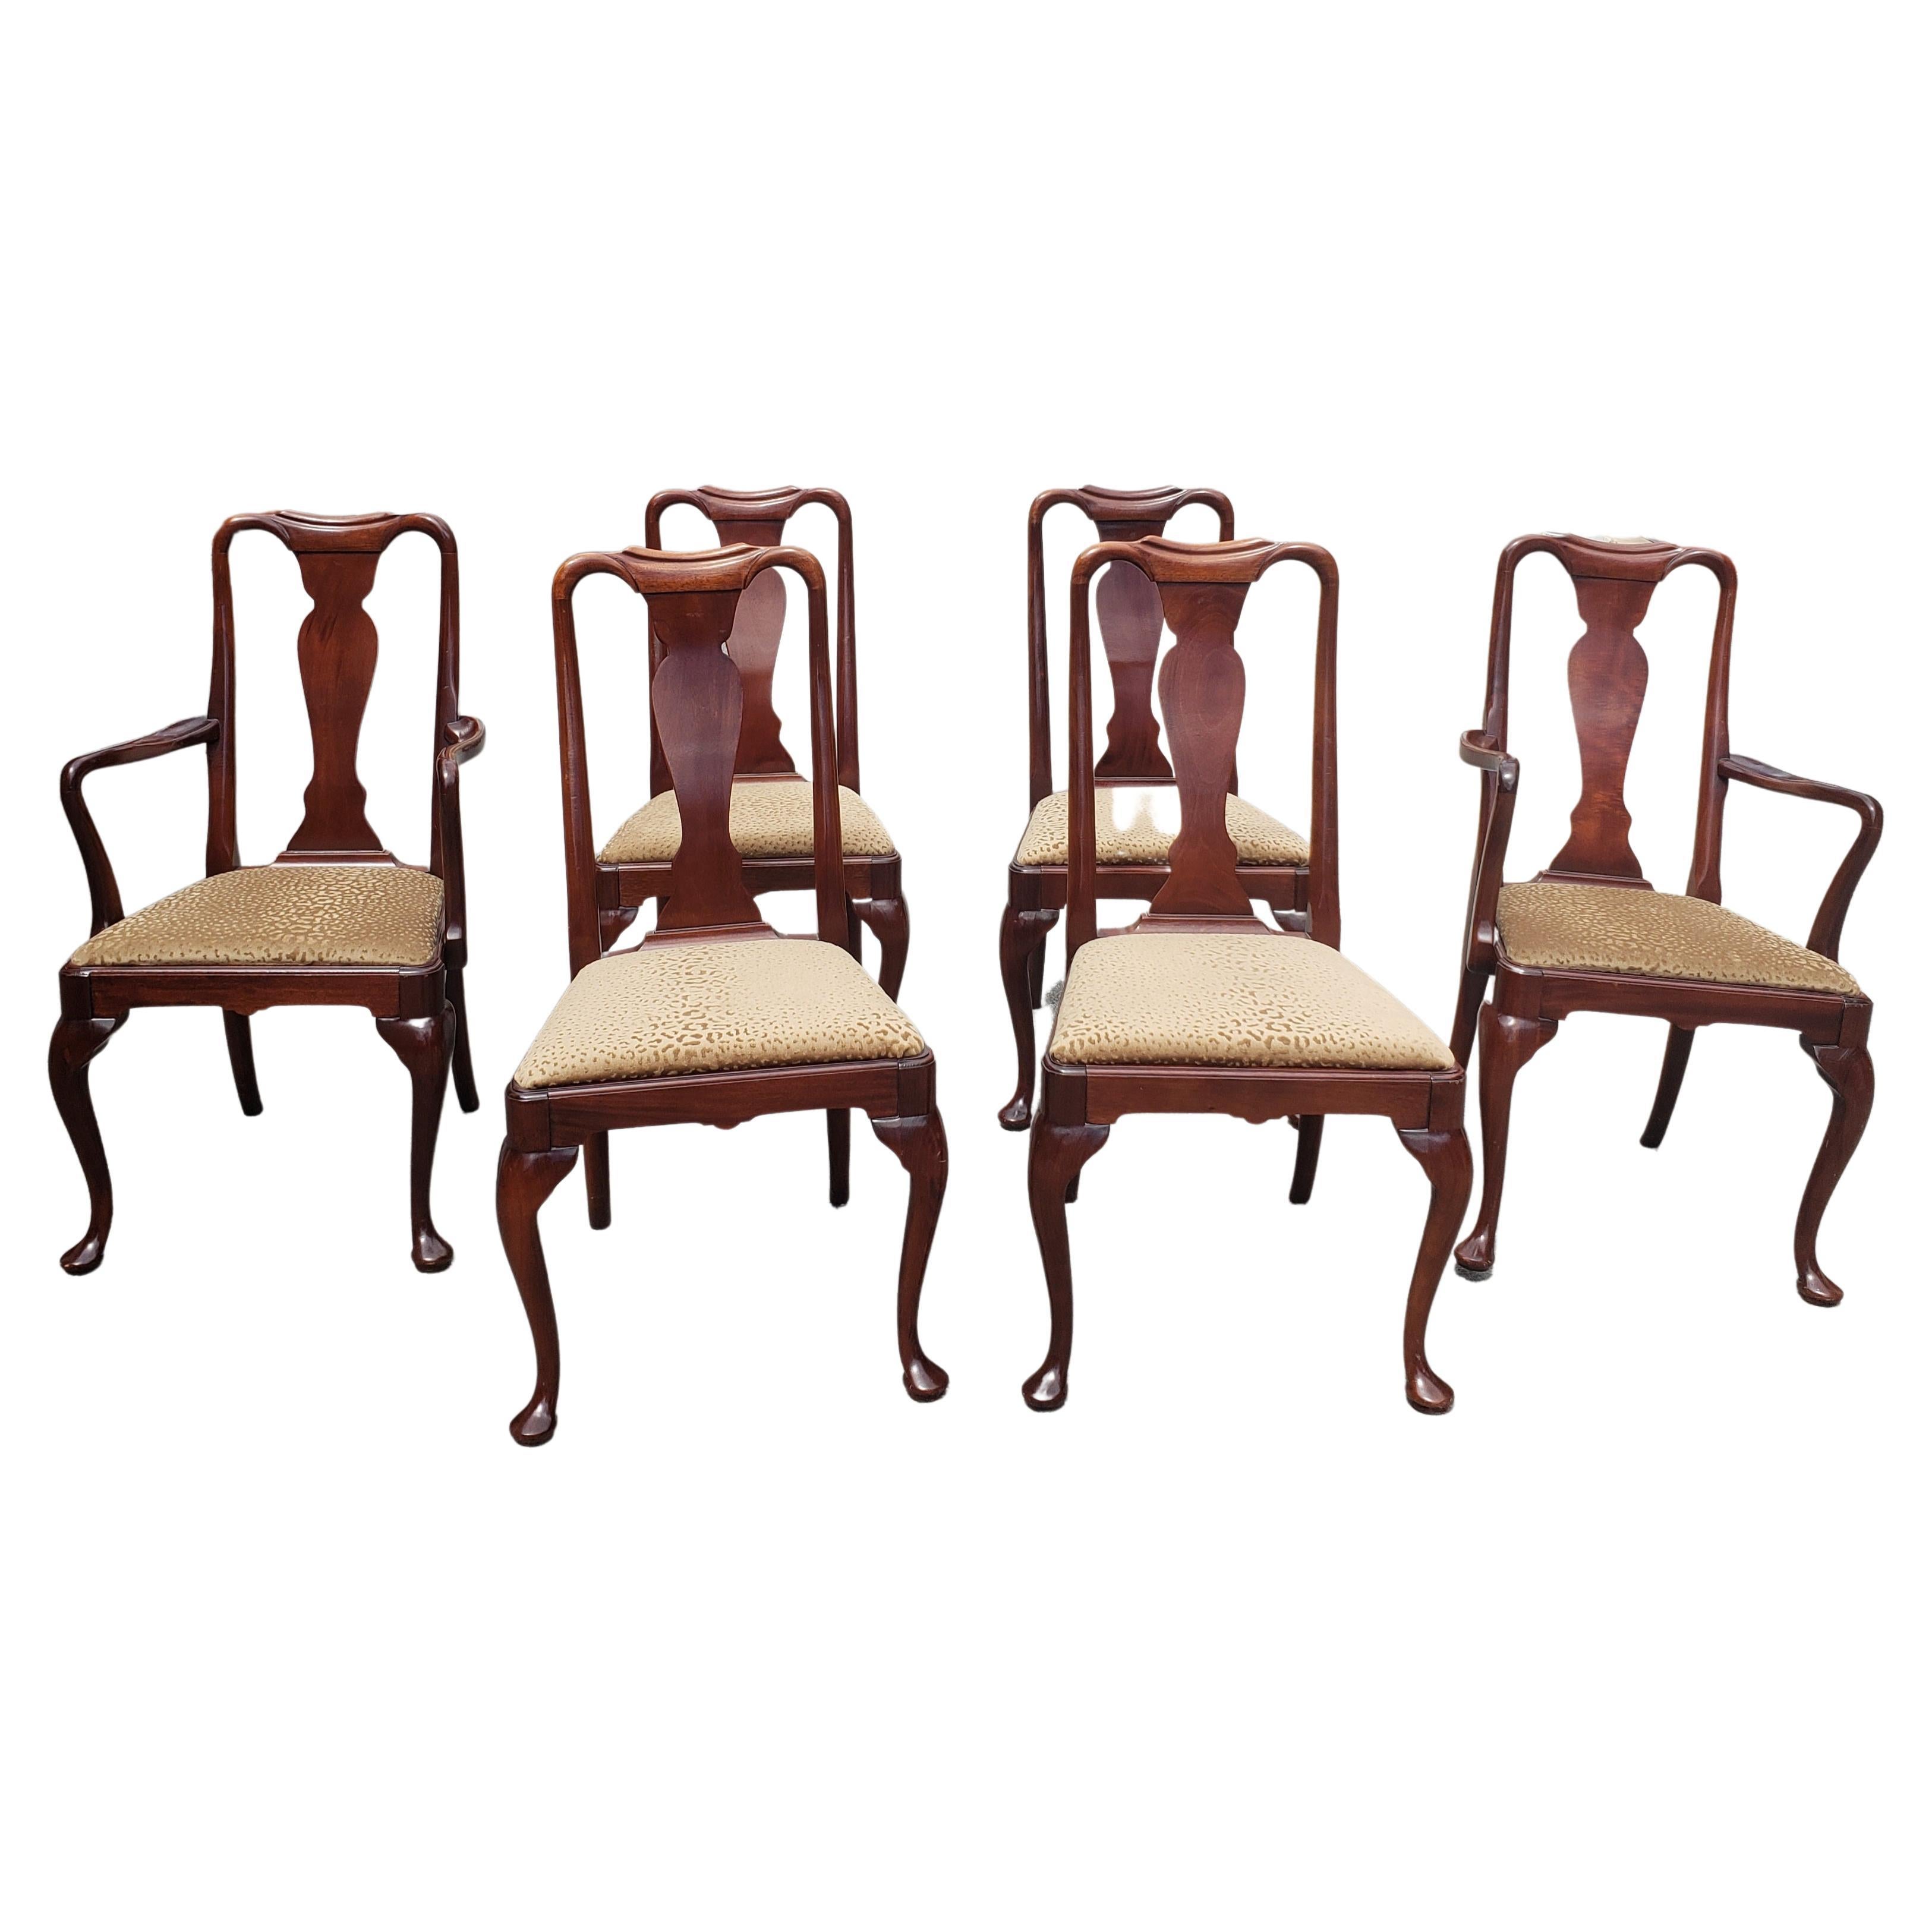 Hickory Chair Dining Chair,s Set Of 6. These Hickory Chairs are made of solid mahogany
 These chairs have classic detail and highlight American craftsmanship. Recently professionally reupholstered in beautifully leopard print velvet fabric and